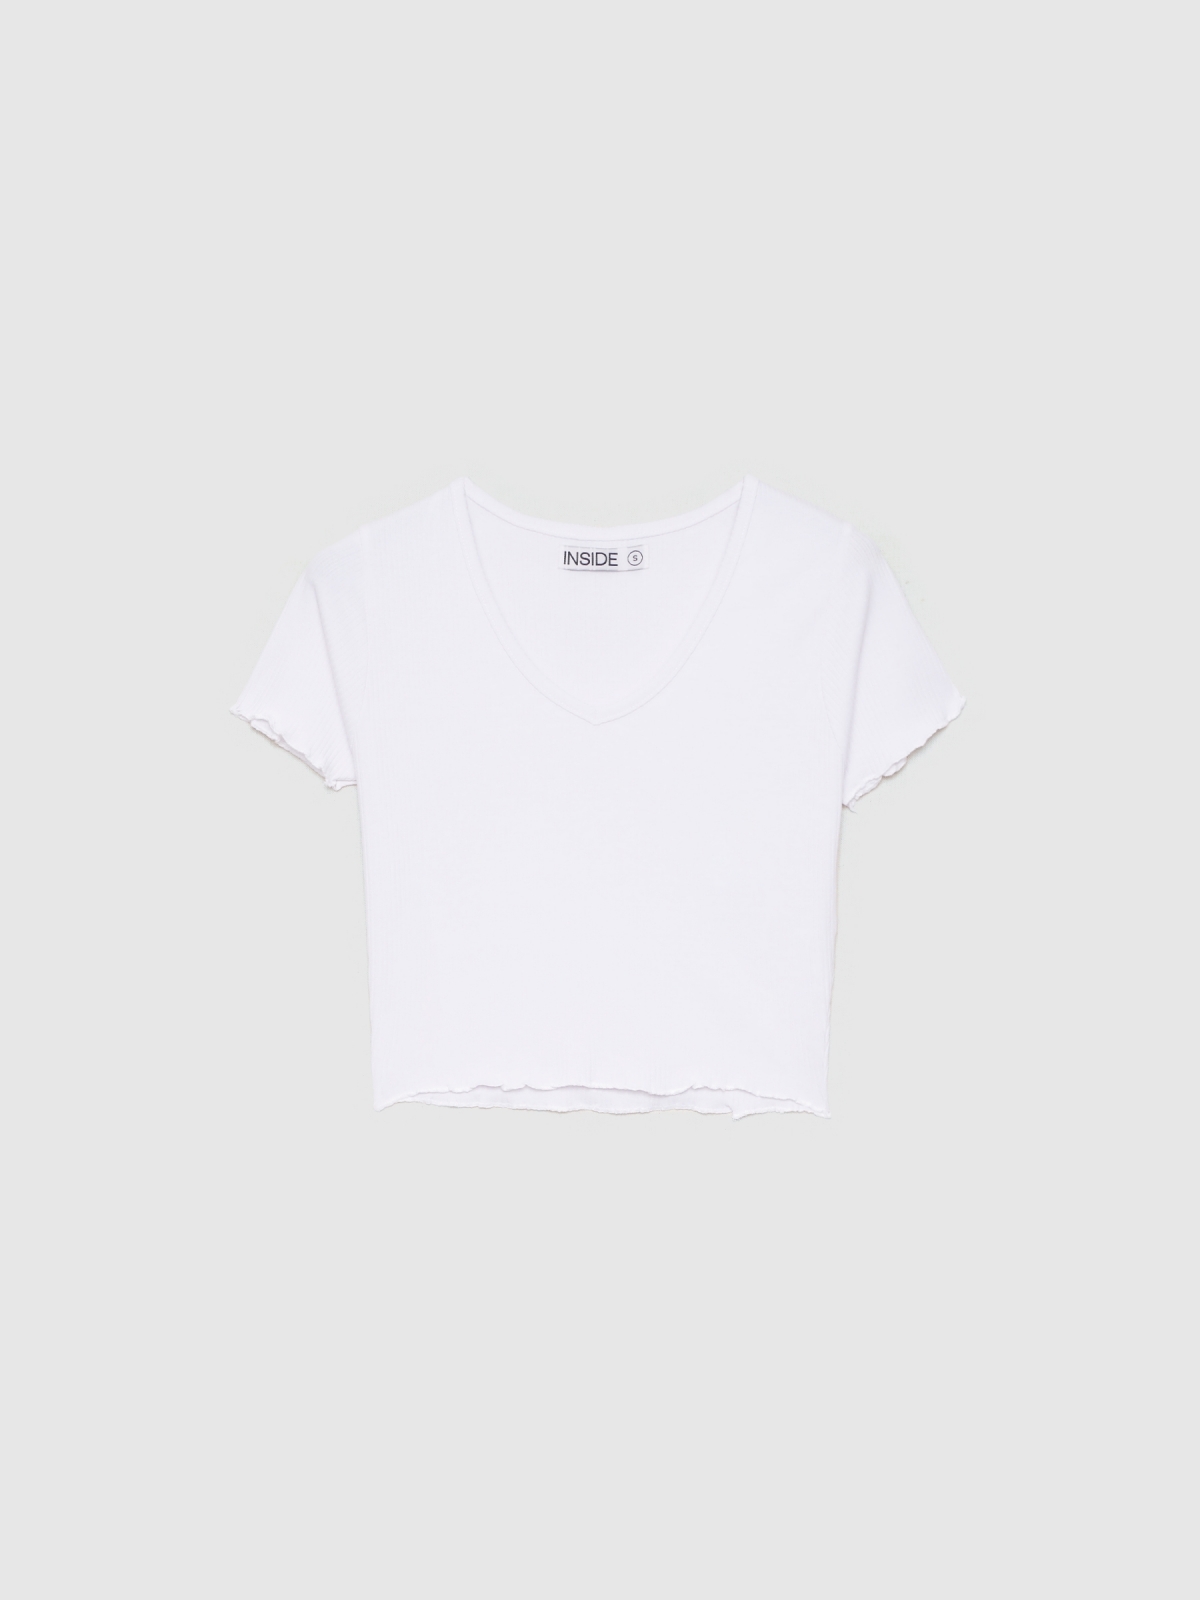  Curly t-shirt white